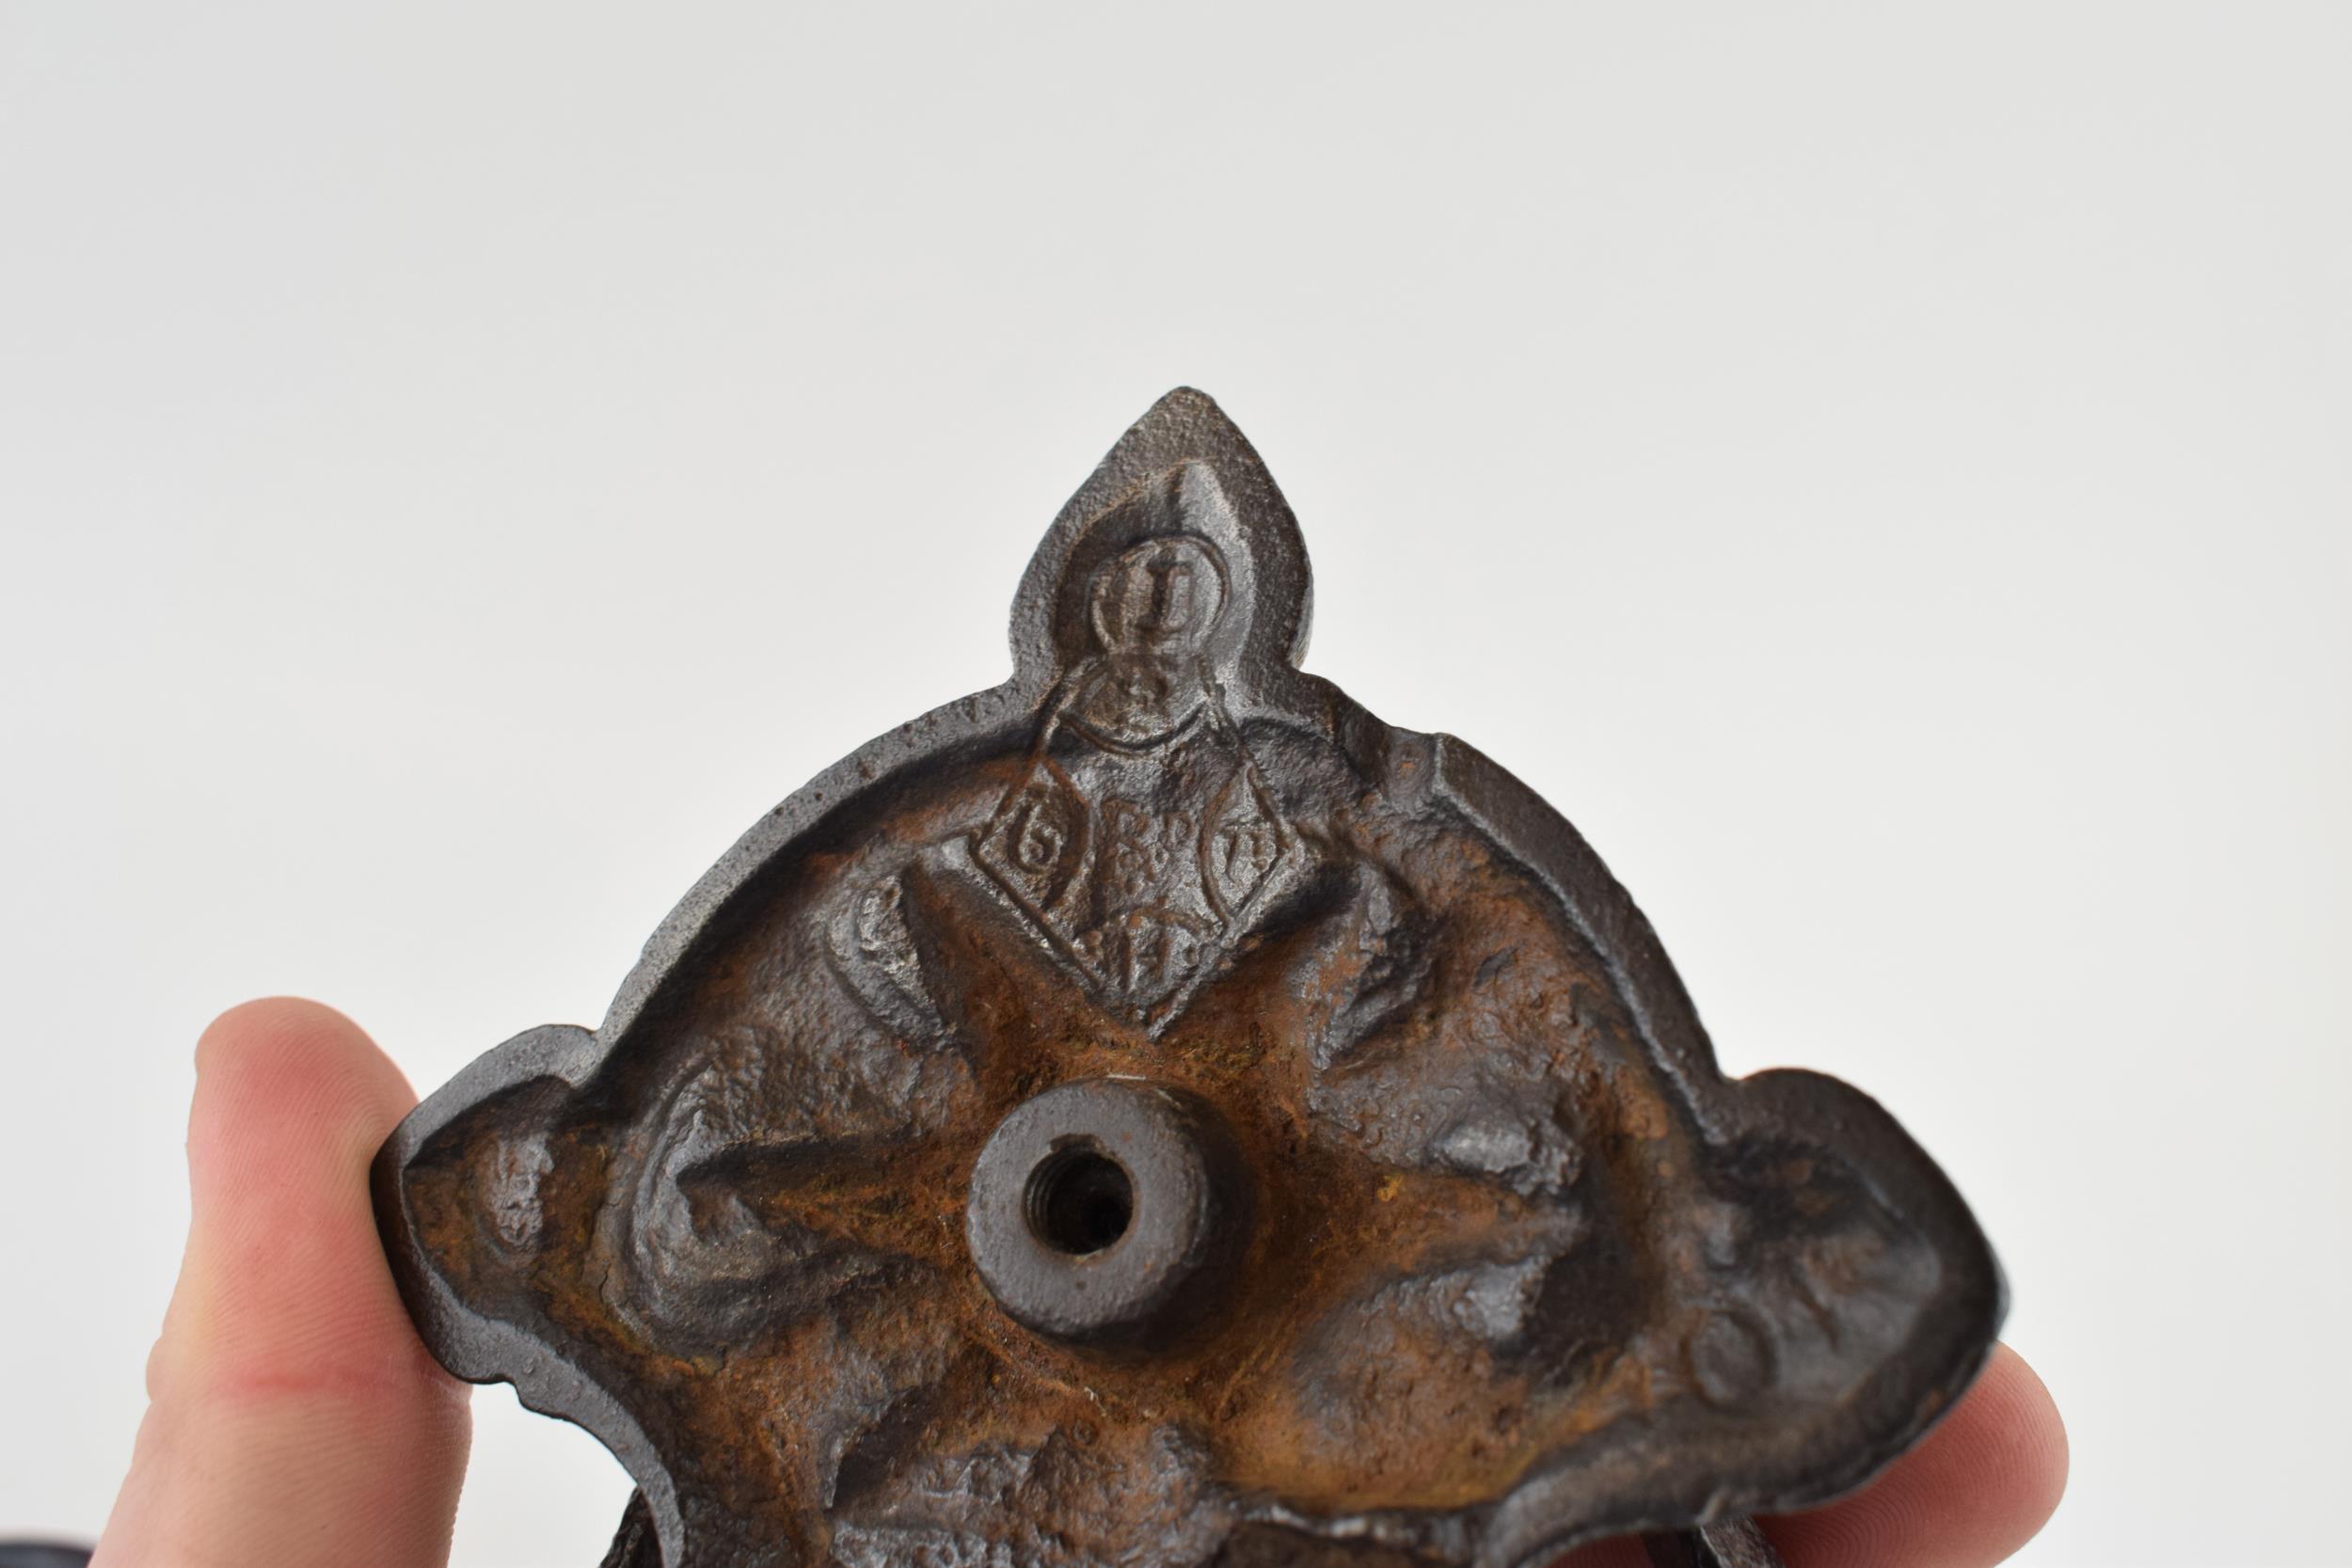 A Kenrick and Sons or similar door knocker together with a ceramic Victorian door knob. (2) 23cm. - Image 3 of 4